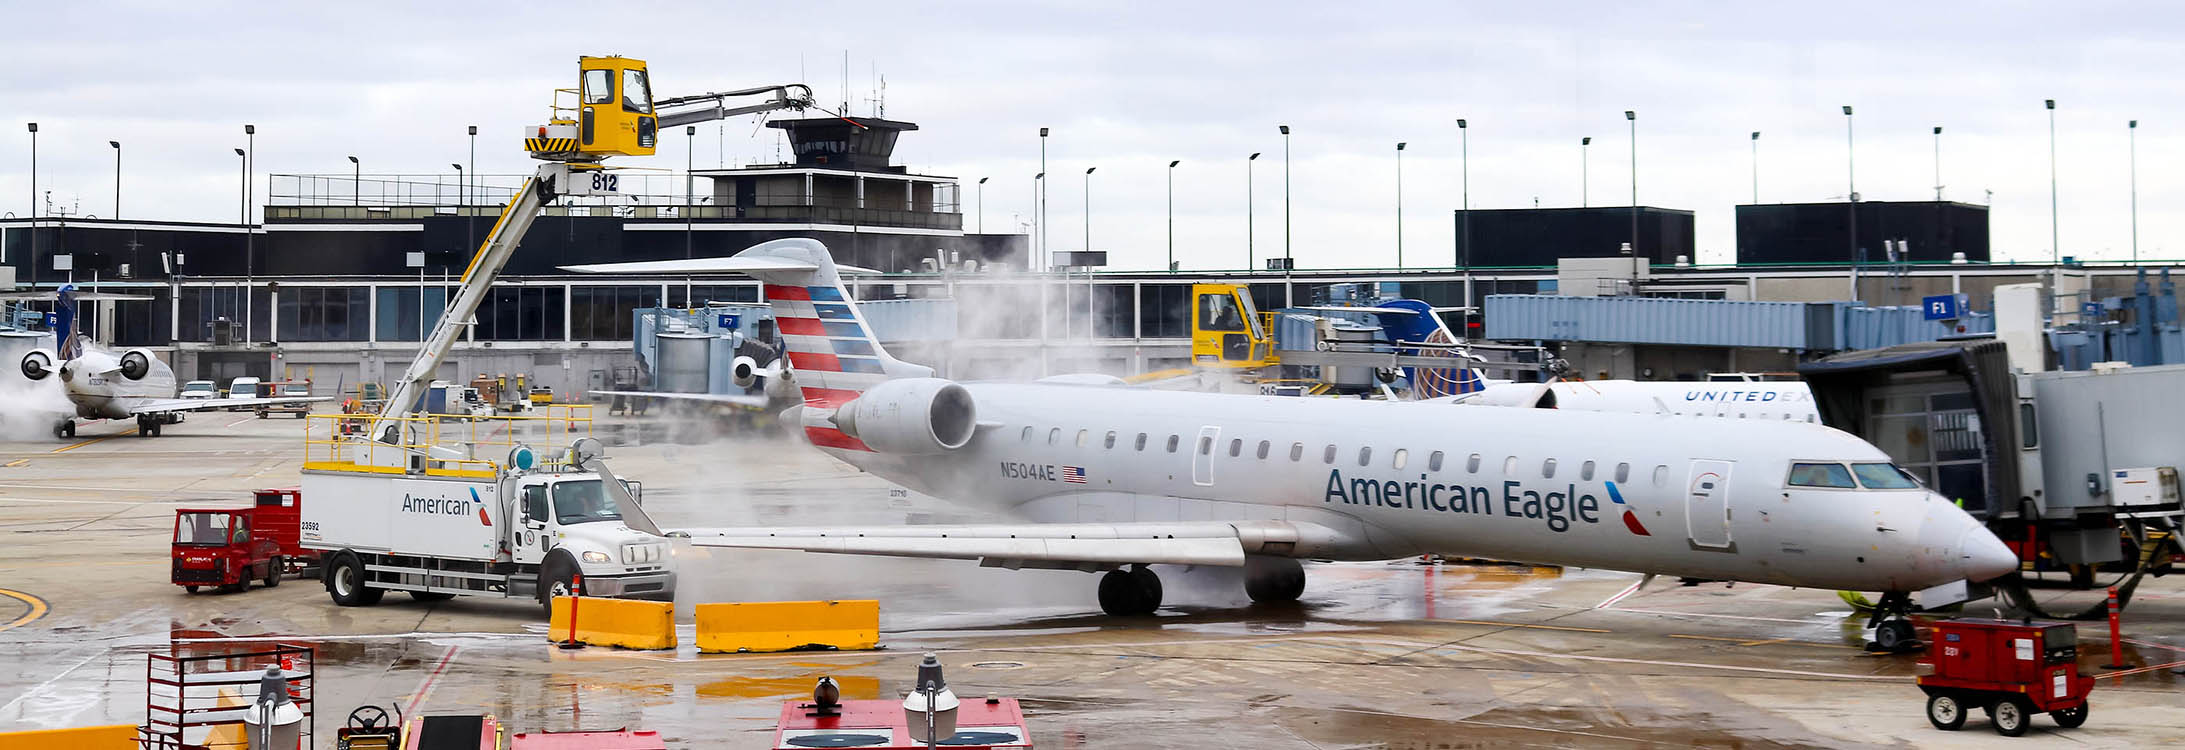 An American Eagle aircraft is deiced at O’Hare Airport in Chicago. Dr. Yang Liu, an engineering professor at East Carolina University, is conducting research to help improve anti-icing and deicing techniques to prevent aircraft crashes. (Photo from Bigstock)